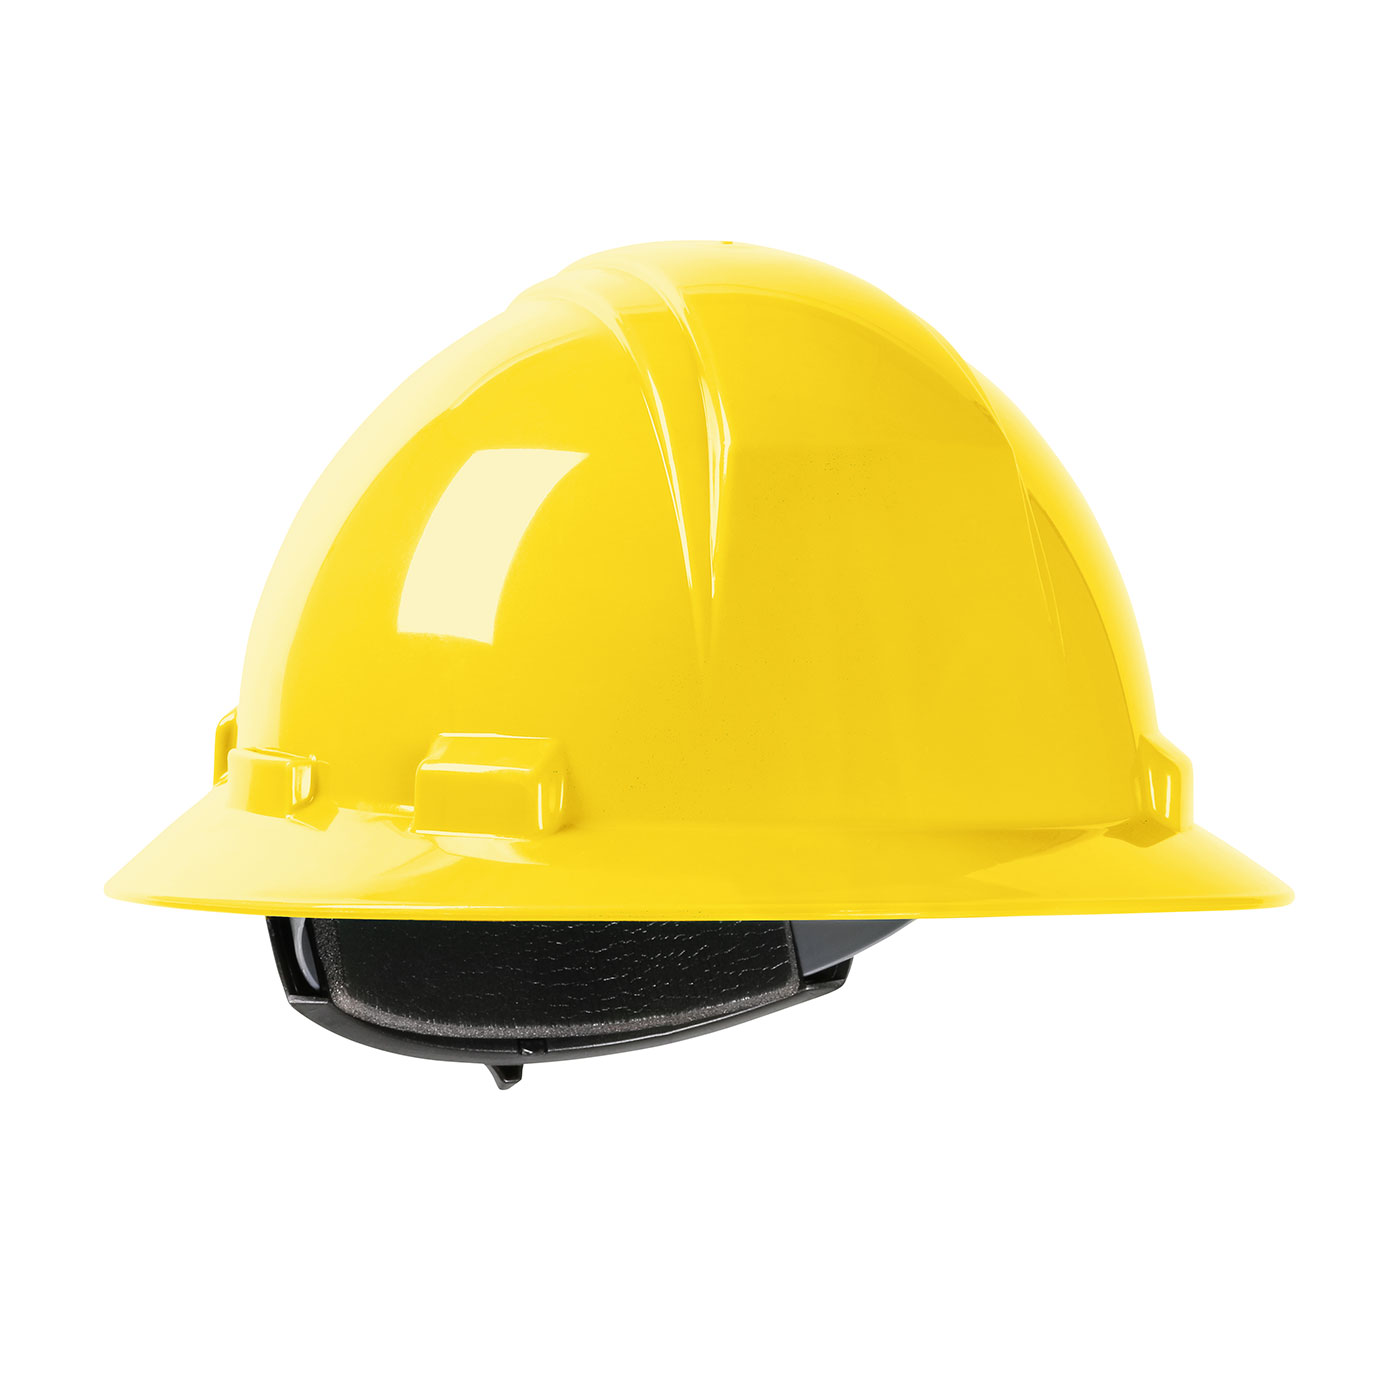 280-HP261R PIP® Dynamic Kilimanjaro™ Full Brim Hard Hat with HDPE Shell, 4-Point Textile Suspension and Wheel Ratchet Adjustment - Yellow